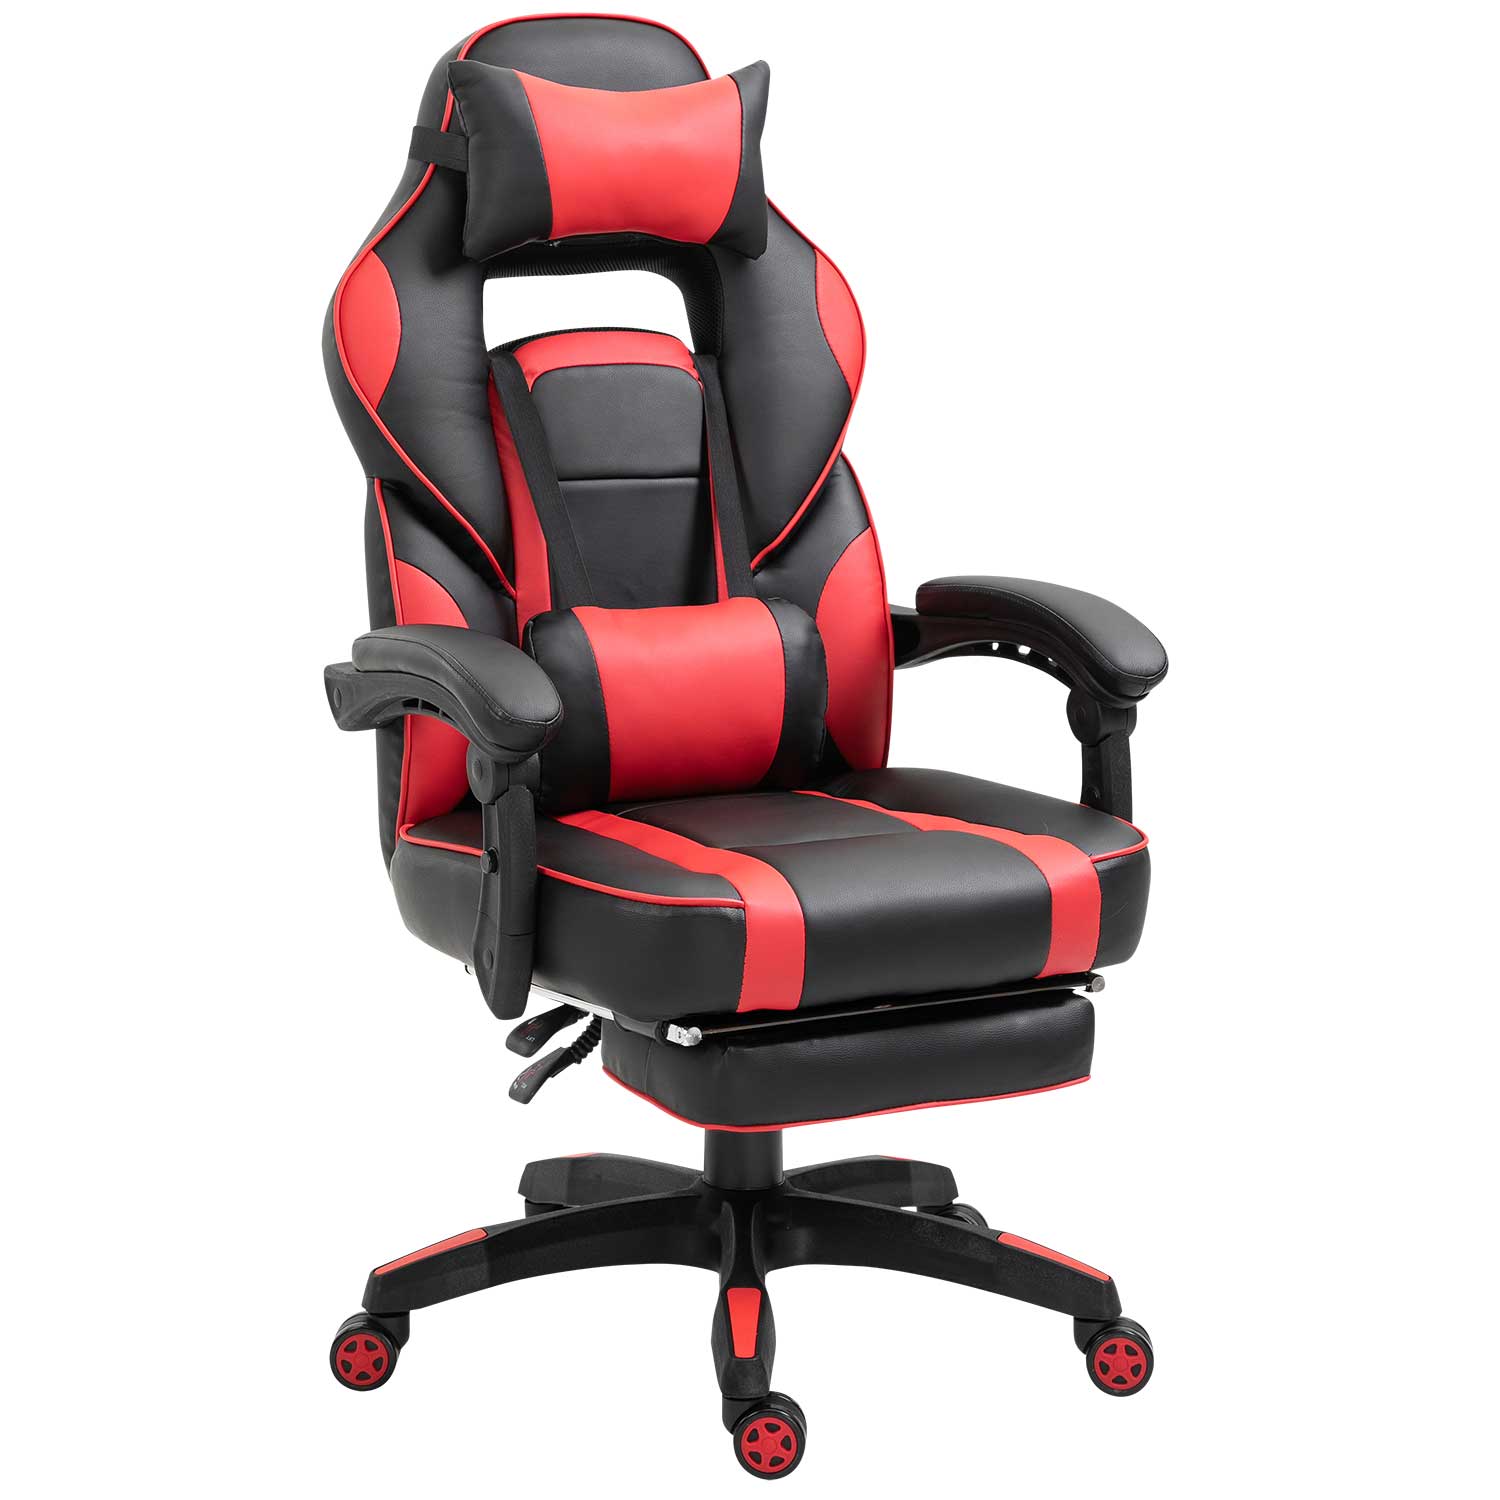 Black and Red Ergonomic Gaming Office Chair | 2334-RD | AFW.com